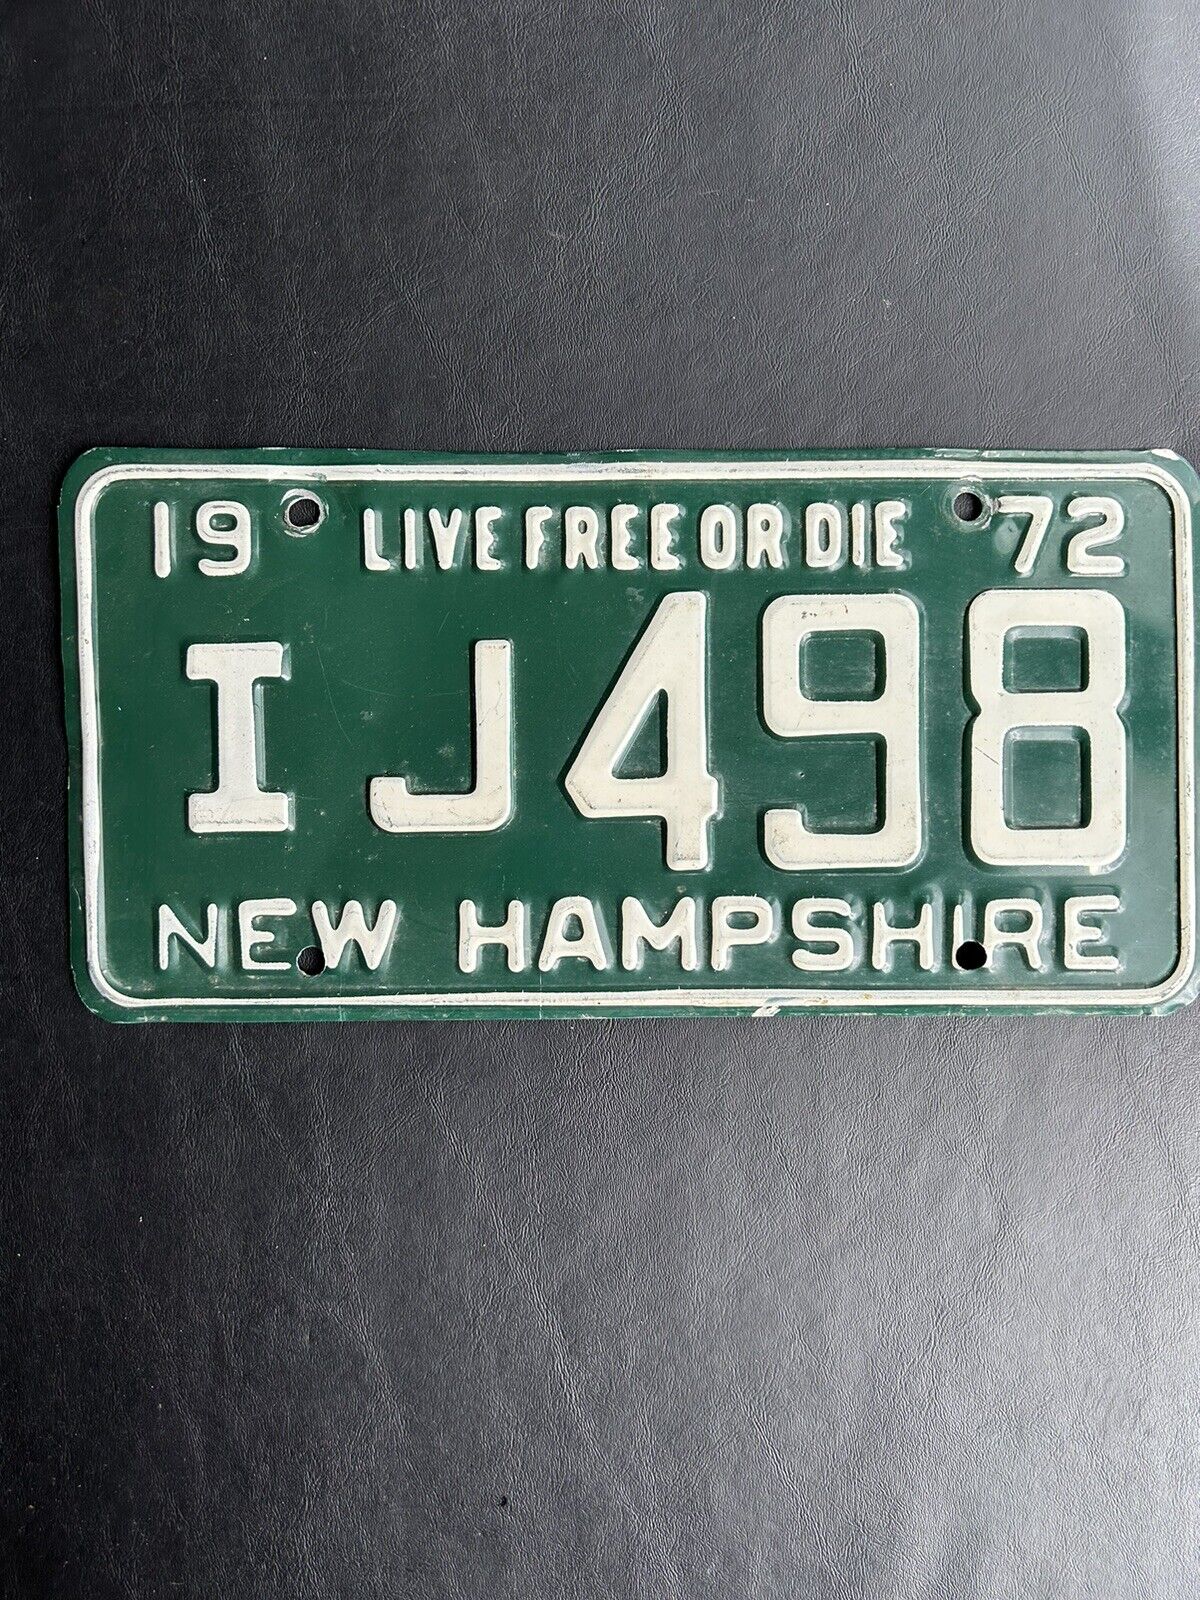 1972 New Hampshire License Plate IJ 498 Live Free Or Die Slogan